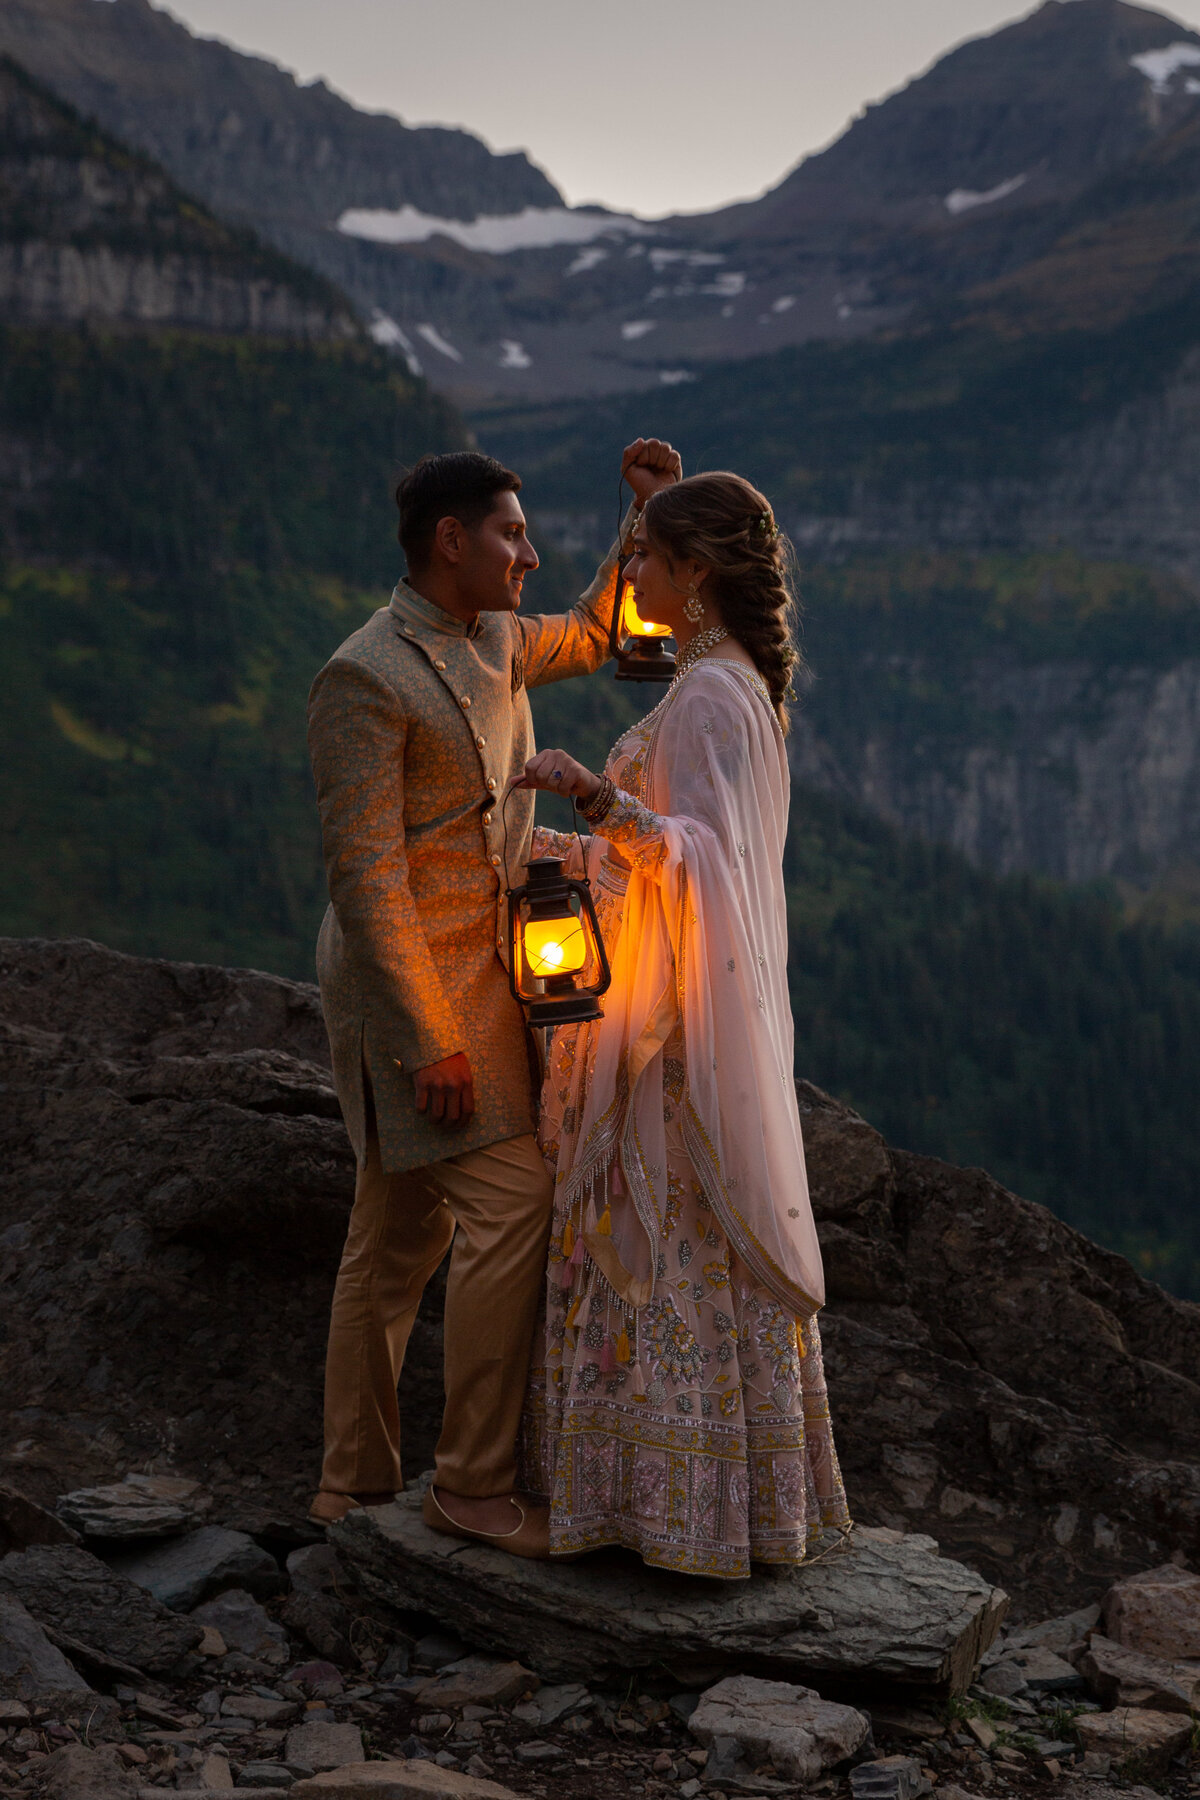 A bride and groom wearing Indian wedding attire stand facing each other on a rock in Glacier National Park, holding lanterns up to provide light.